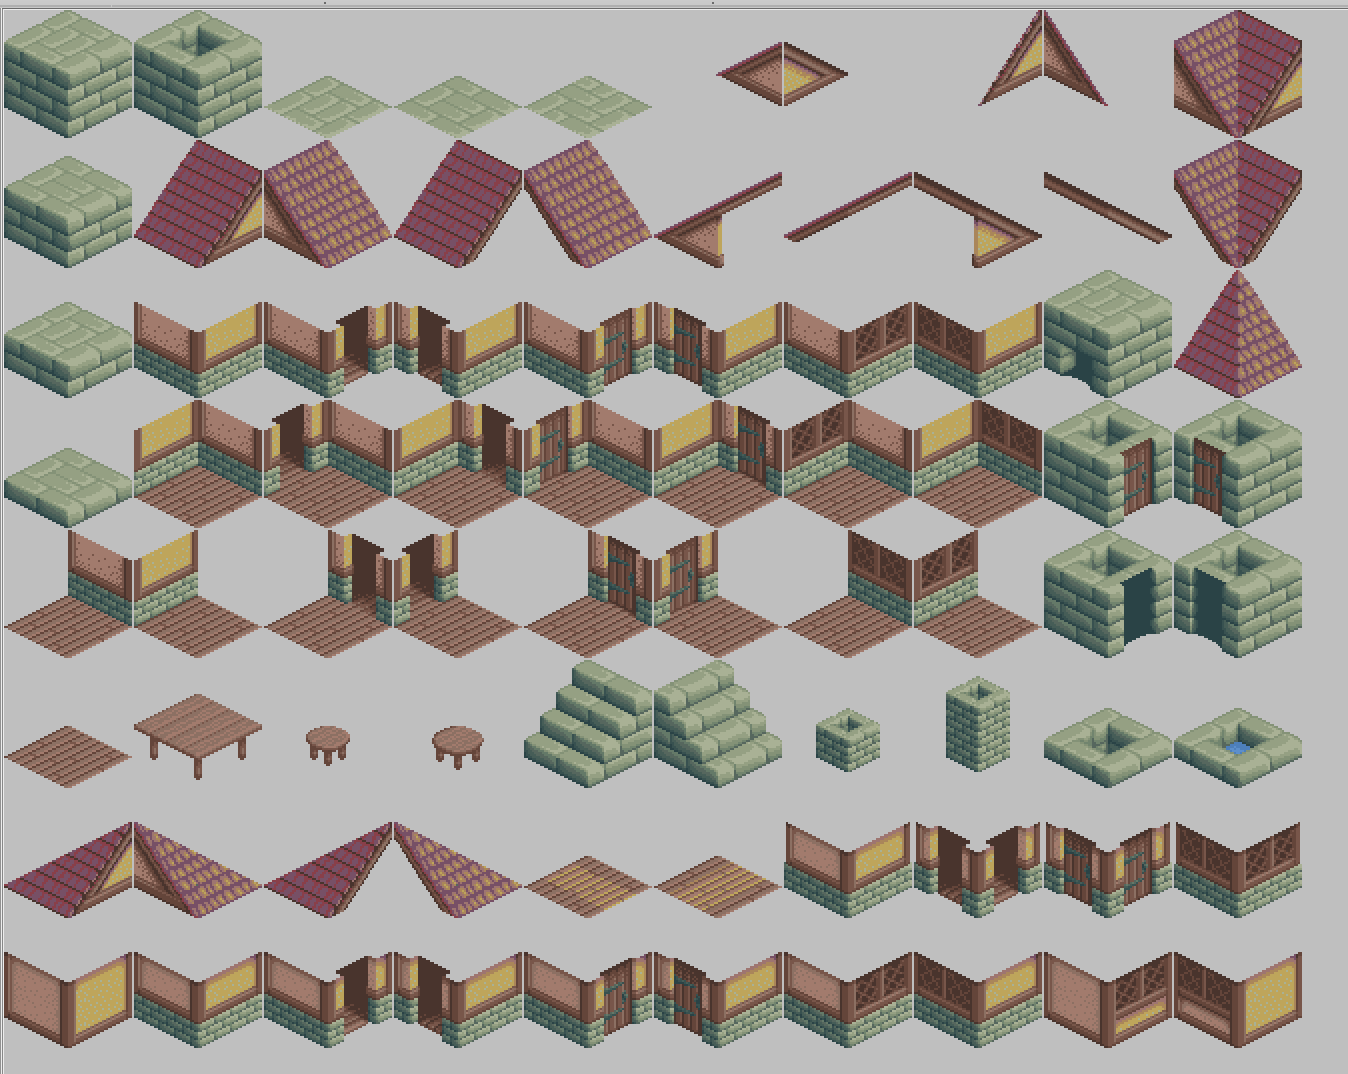 Isometric map generation using Flame, Flutter's game engine